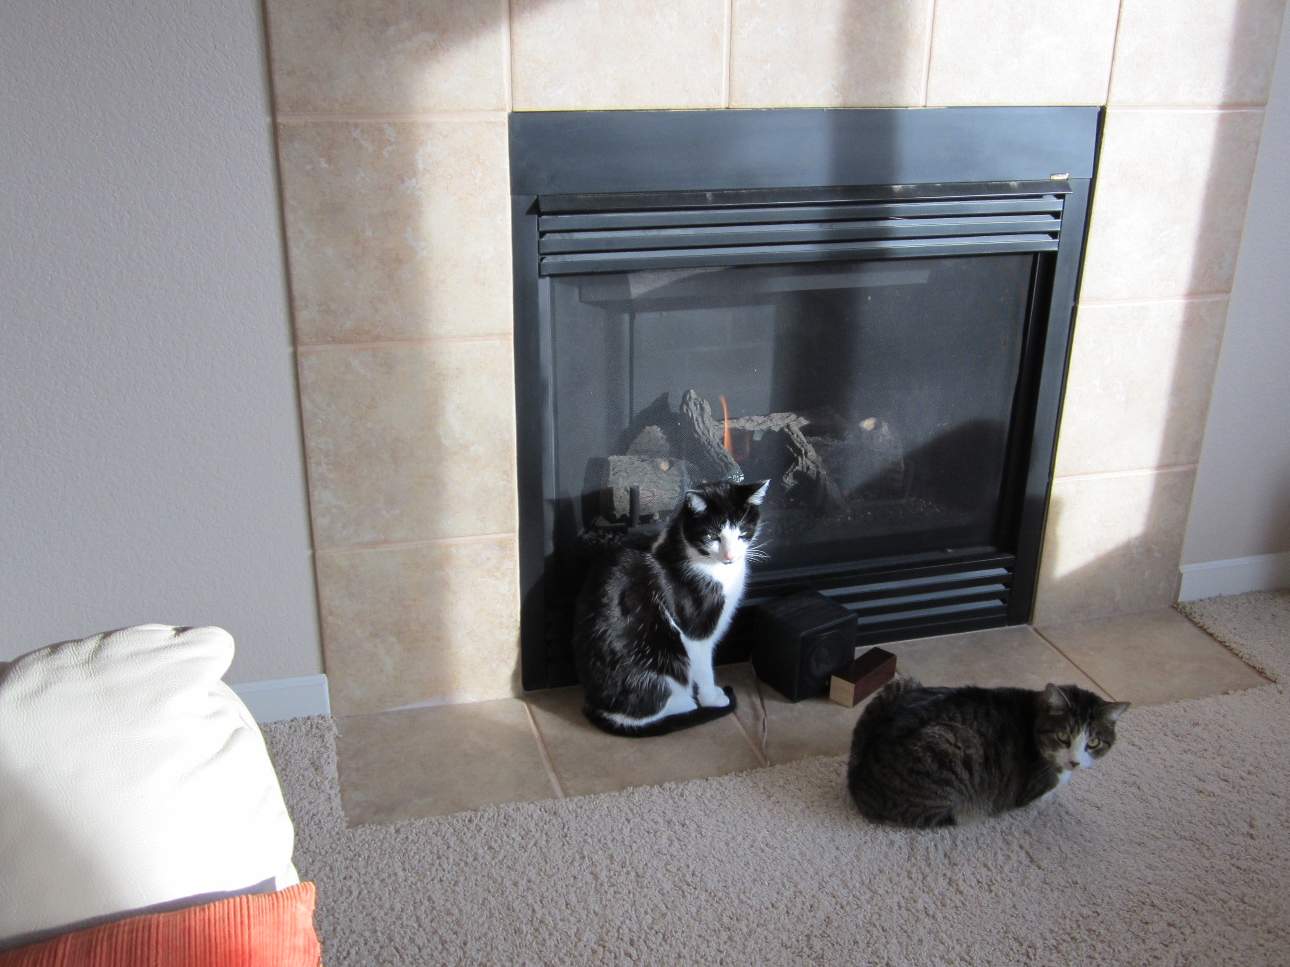 The furnace broke! Fortunately the gas fireplace still worked so the kitties didn't freeze during the weekend.